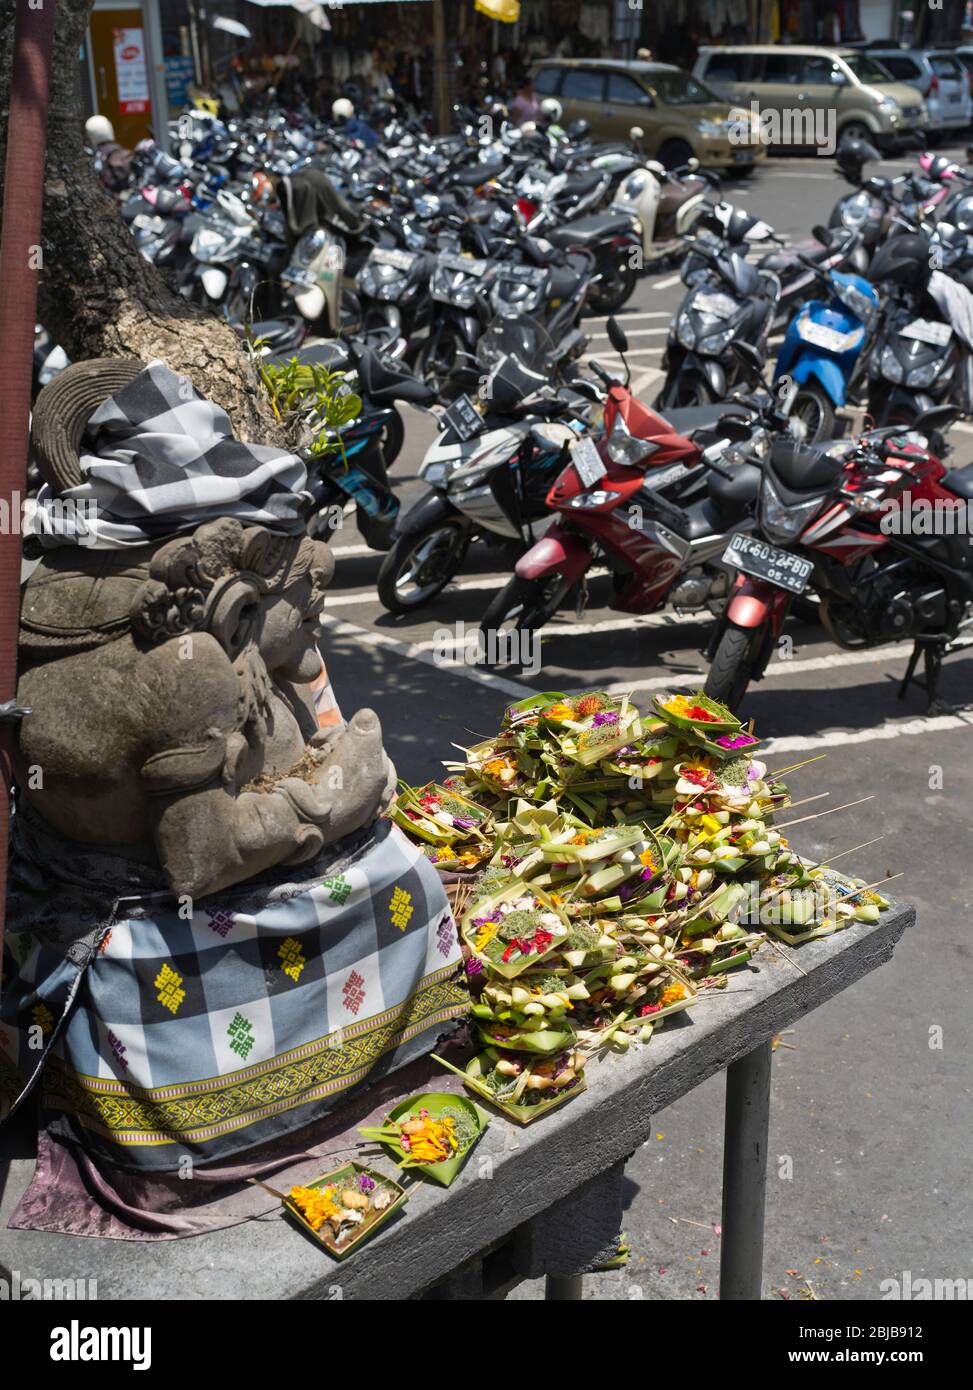 dh Balinese market carpark BALI INDONESIA ASIA Hindu guardian statue offerings in car park scooters parked food offers Stock Photo